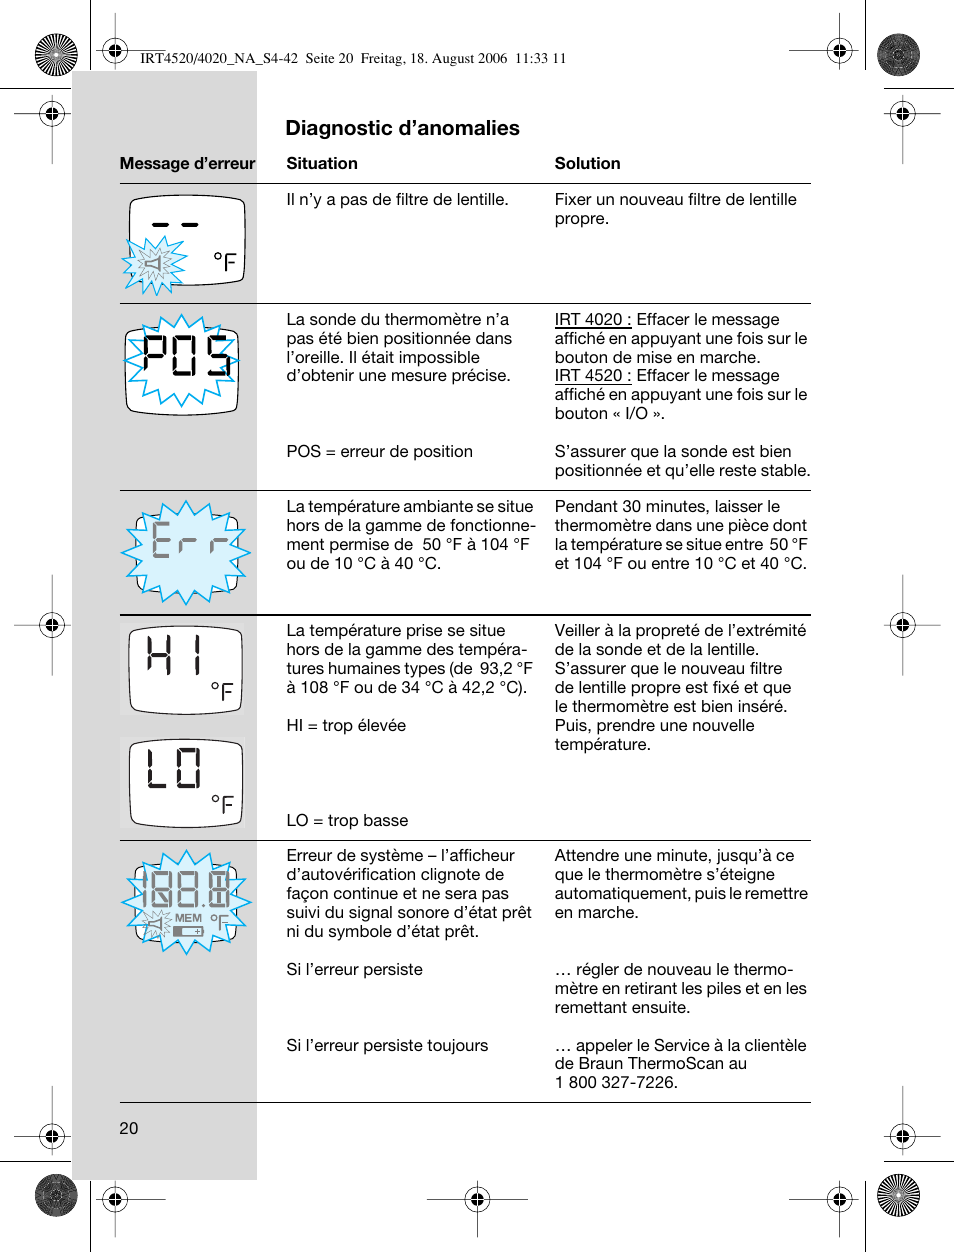 Diagnostic d'anomalies | Braun ThermoScan IRT 4520 User Manual | Page 20 /  42